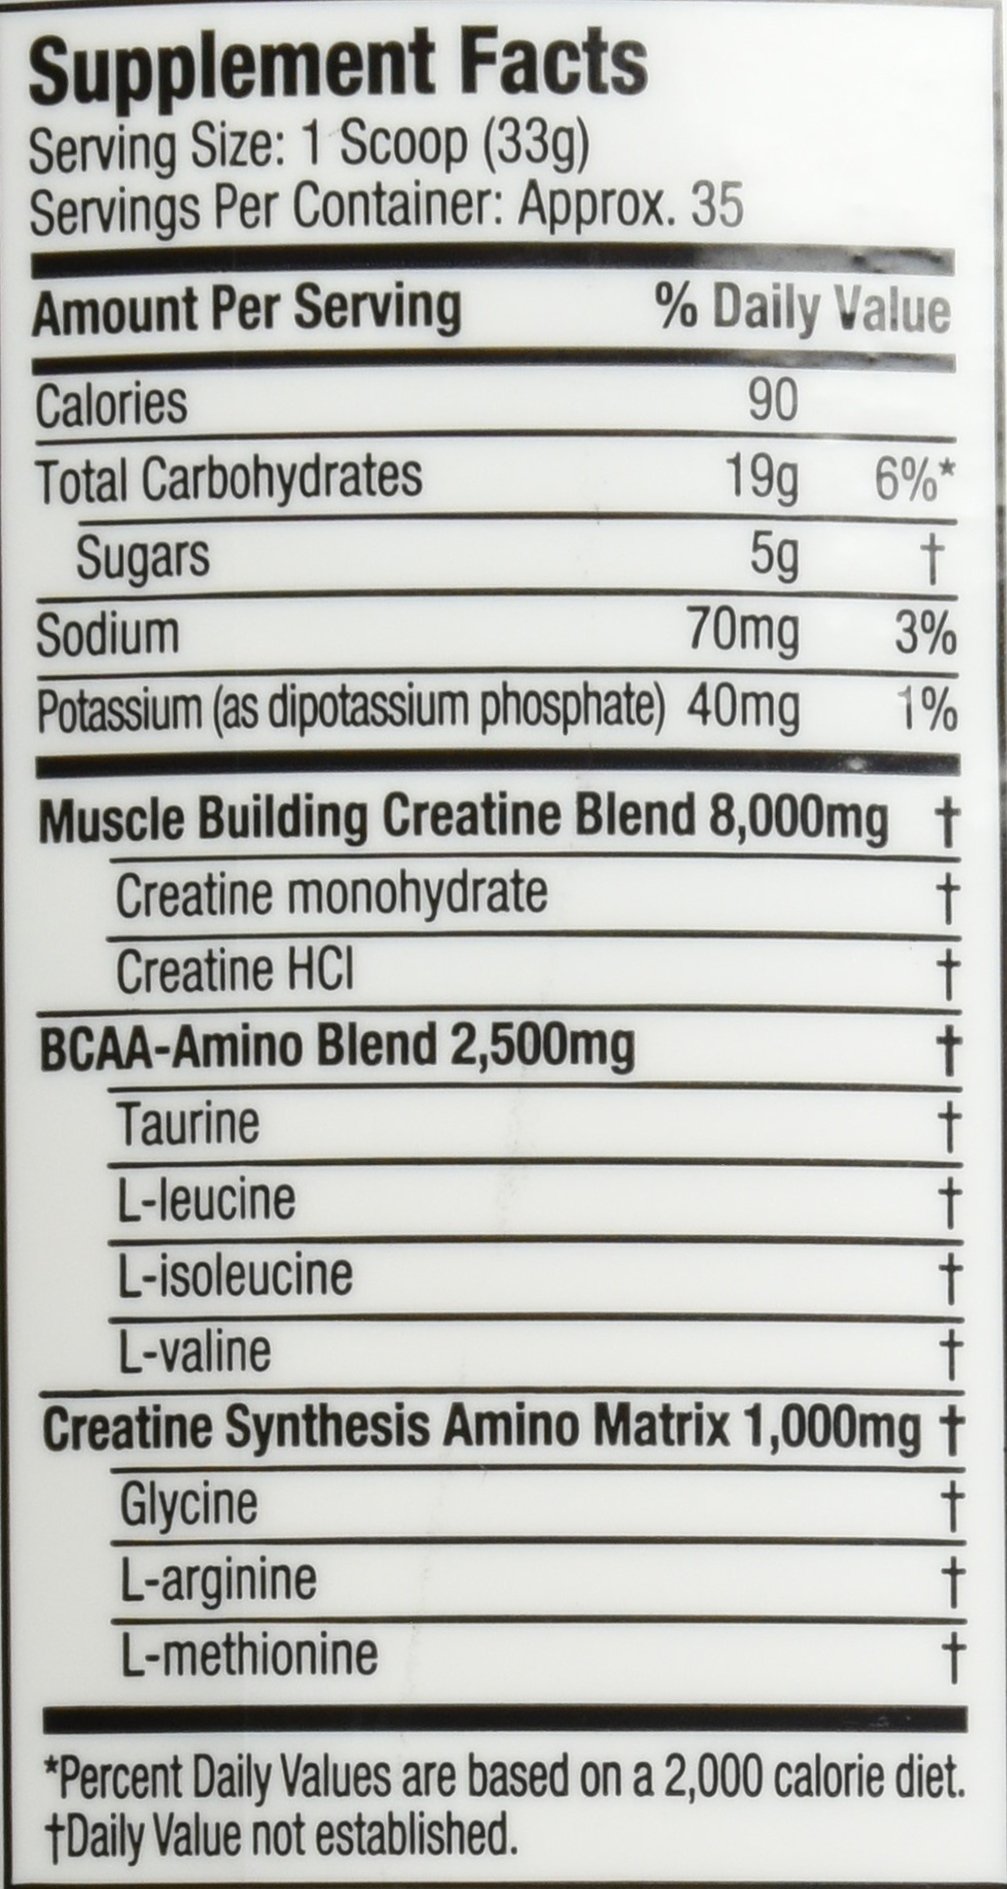 Six Star Creatine Powder Creatine X3 | Creatine HCl + Creatine Monohydrate Powder | Muscle Builder & Muscle Recovery Workout Supplement | Creatine Supplements | Fruit Punch (35 Servings)